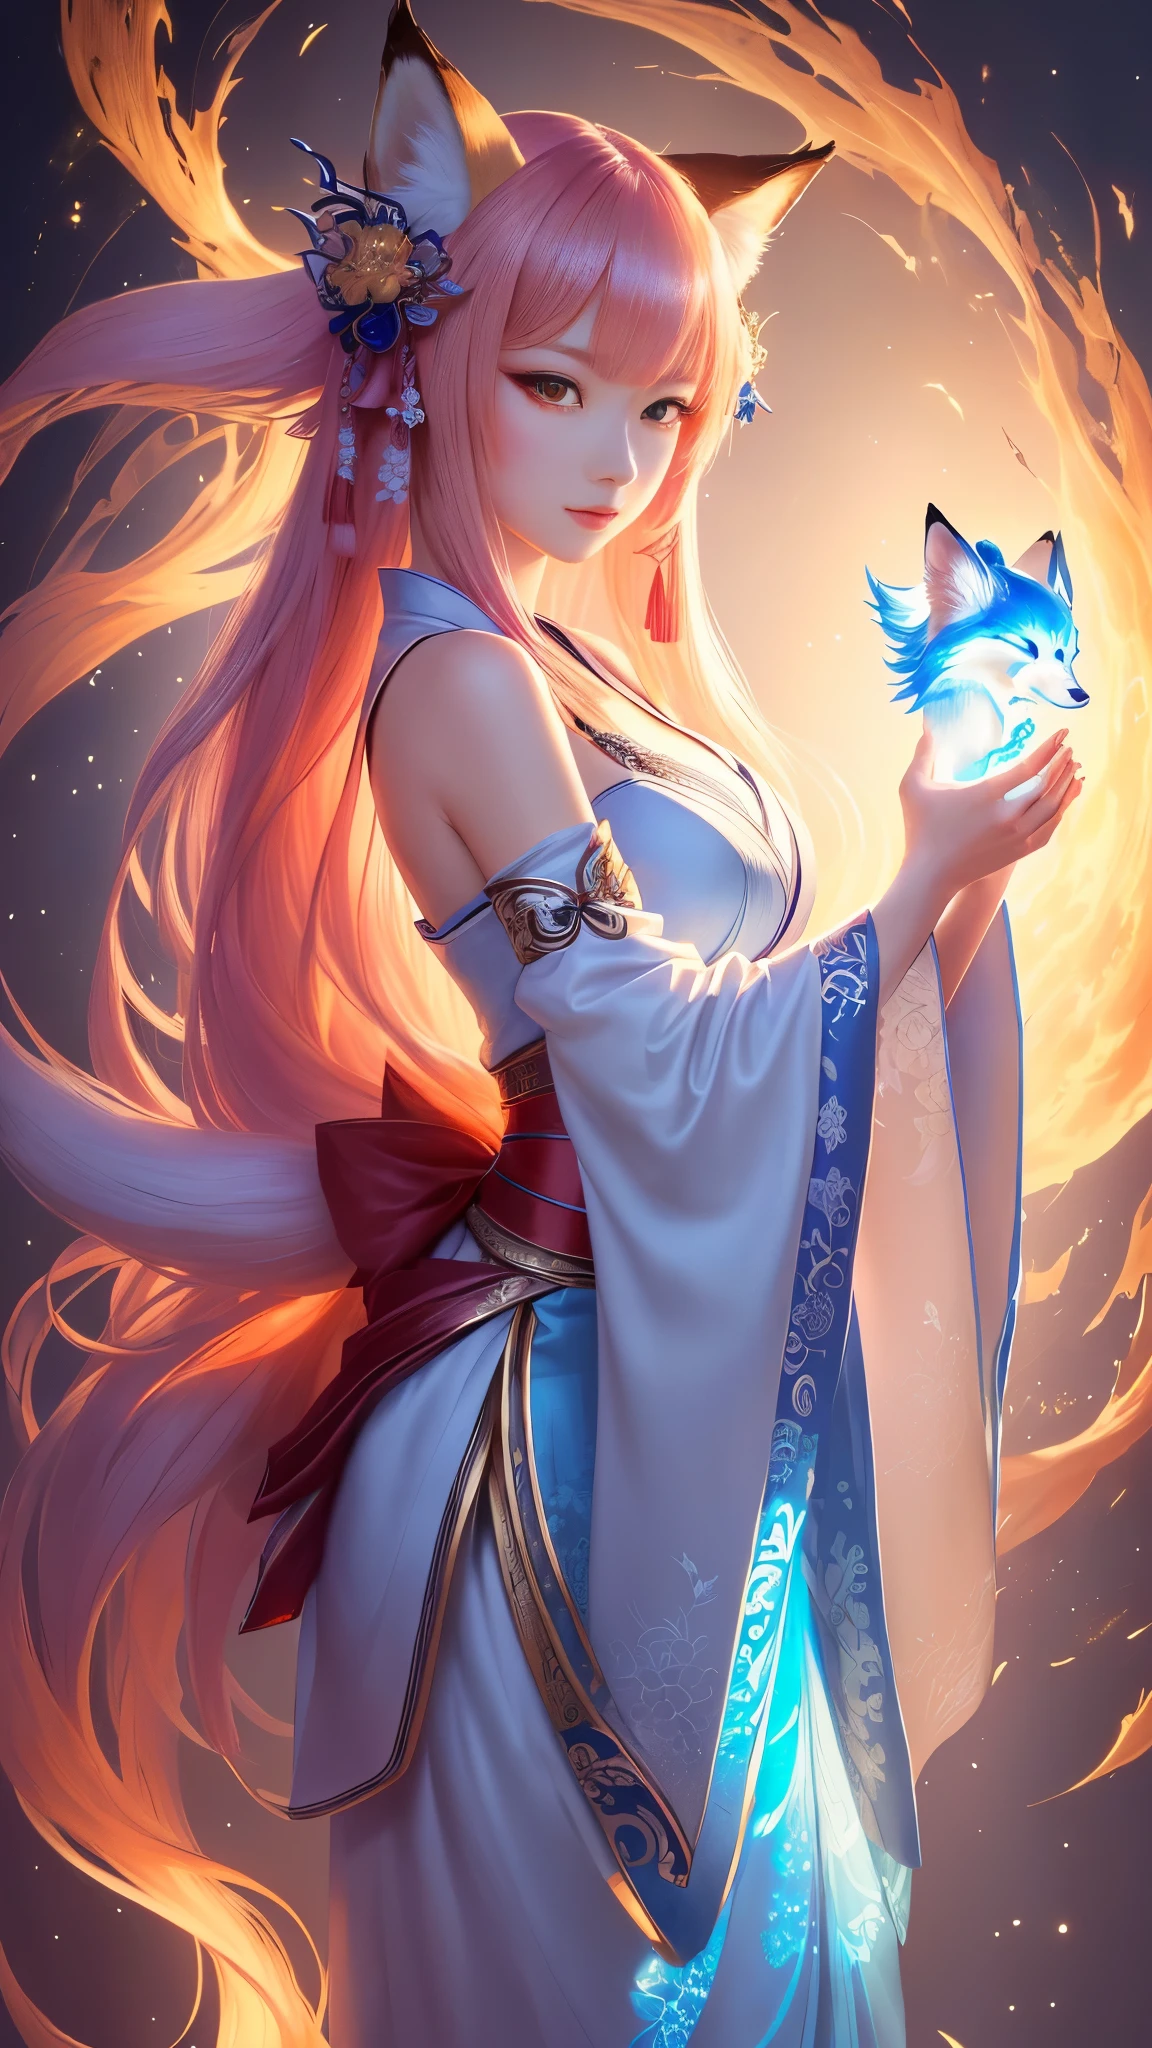 masterpiece , best quality, Close-up, masterpiece, beautiful details, colorful, delicate details, delicate lips, intricate details, genuine, ultrargenuineista, Girl with multicolored haired fox sitting on a branch:sexly, fascinating, ,Colorful Fox, raposa de nine tails, Three tails Fox, Three tails Fox, onmyoji detailed art, beautiful fine art illustration, mythical creatures, Fox, beautiful digital art,shrine maiden,japanese architecture,hold hands,exquisite digital illustration, mizutsune, Inspired by mythical wild web creatures, pixiv in digital art, shining light, high contrast, Mysterious,Girl with multicolored haired fox sitting on a branch,front,looking at the camera